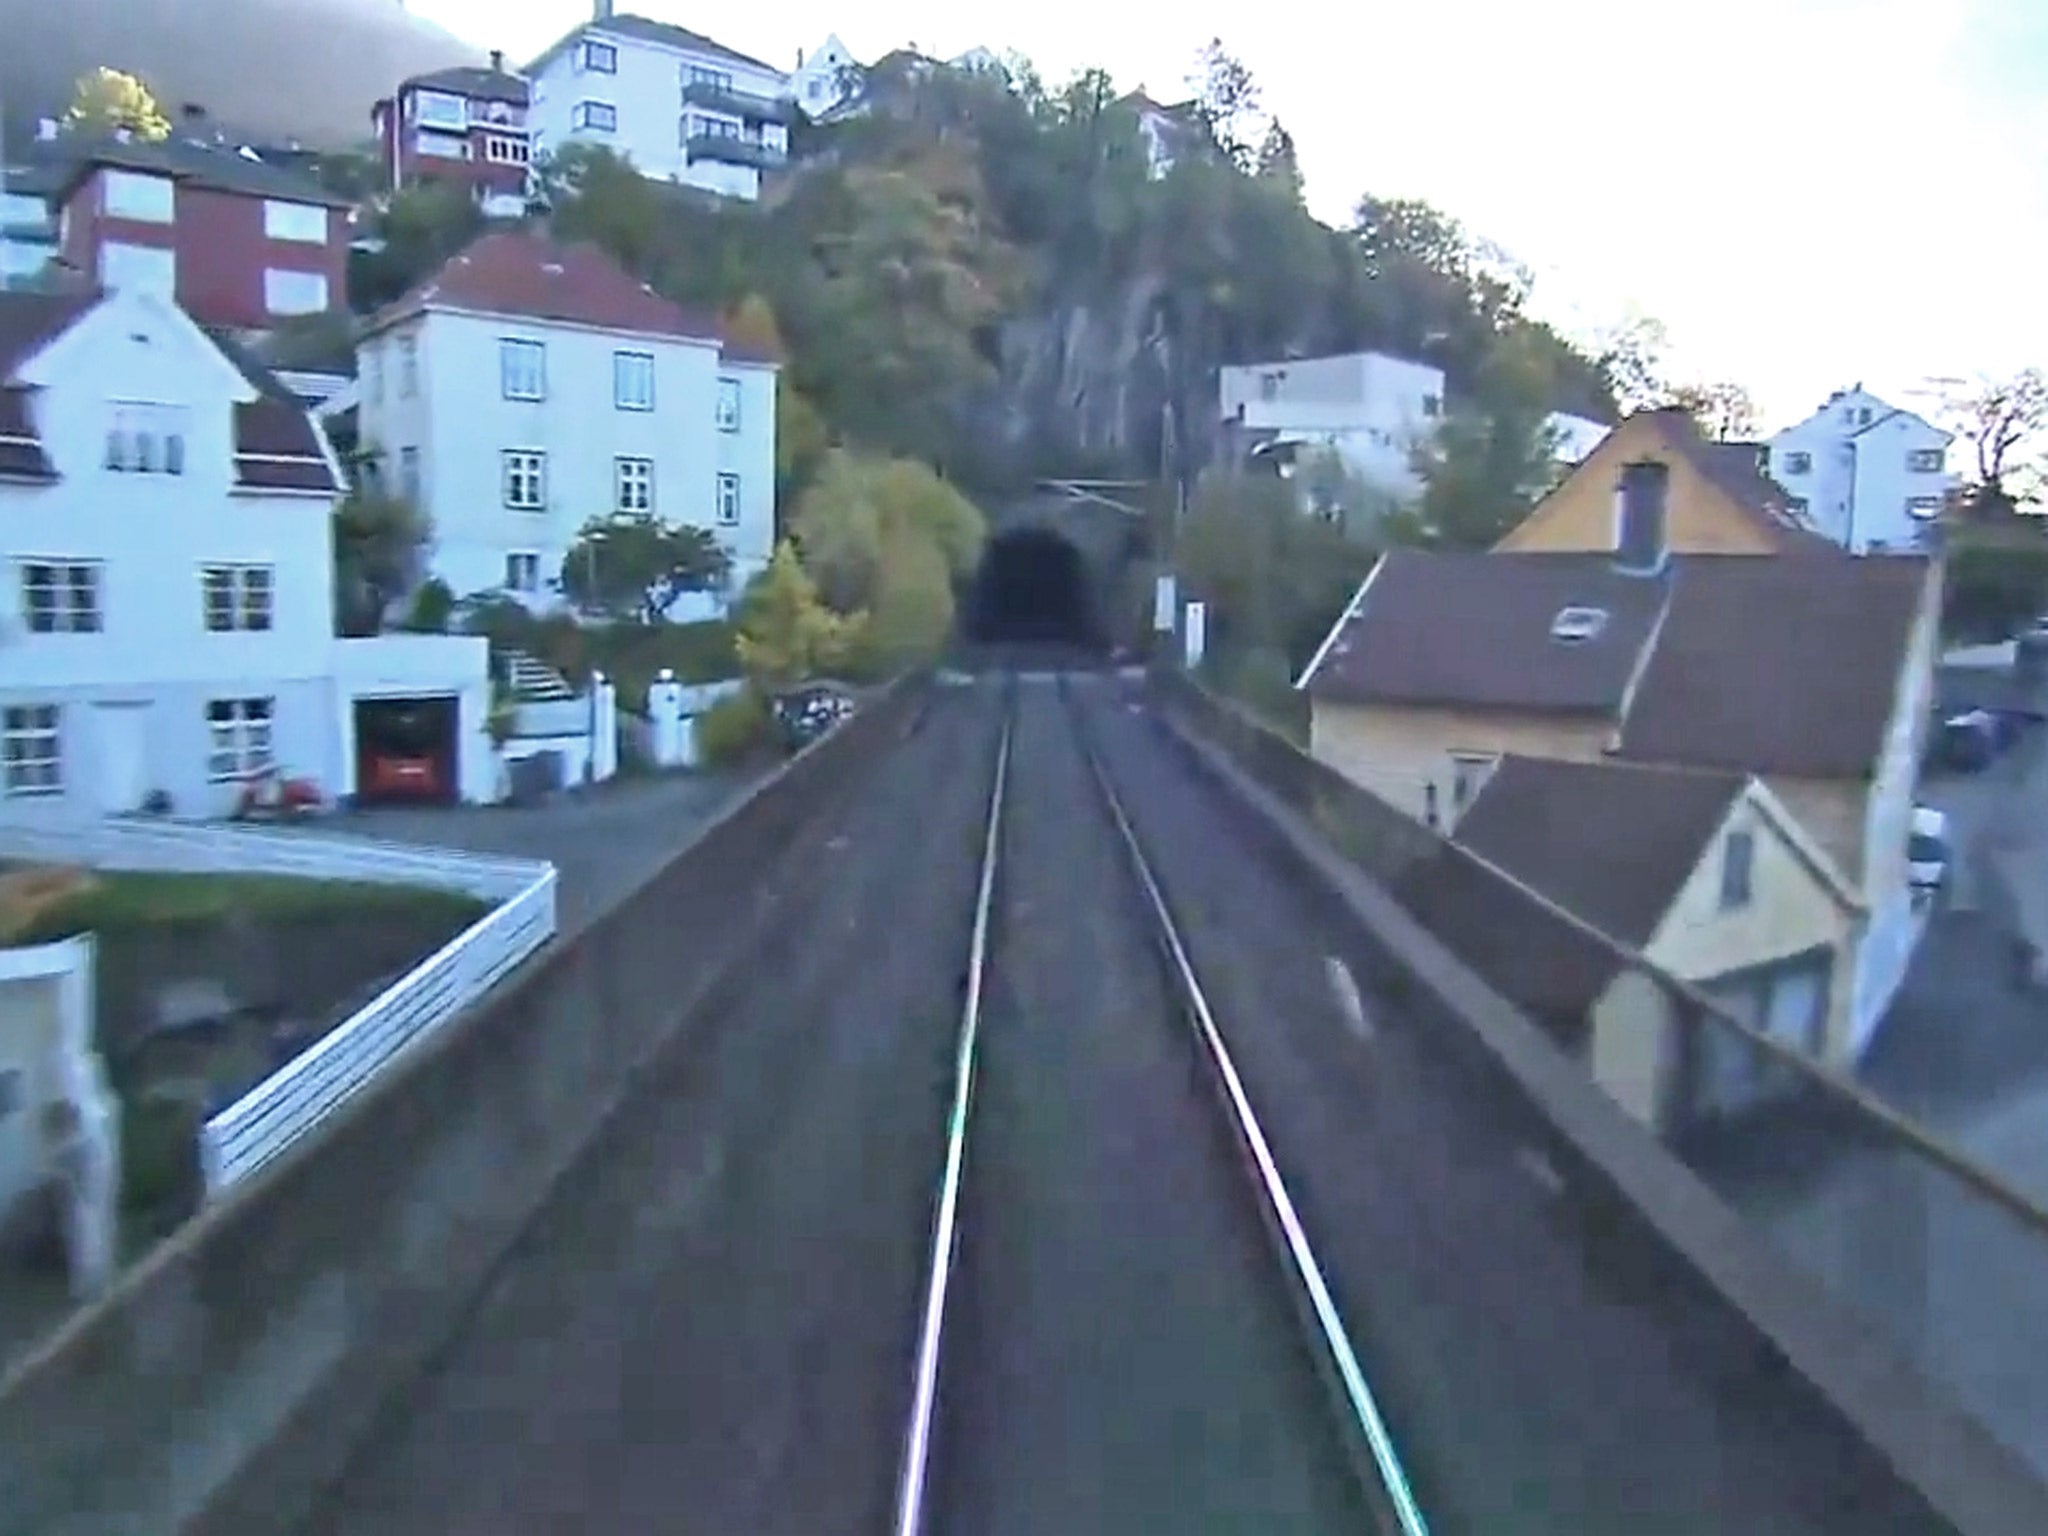 Tunnel vision: a shot from the seven-hour broadcast of a live train journey from Oslo to Bergen